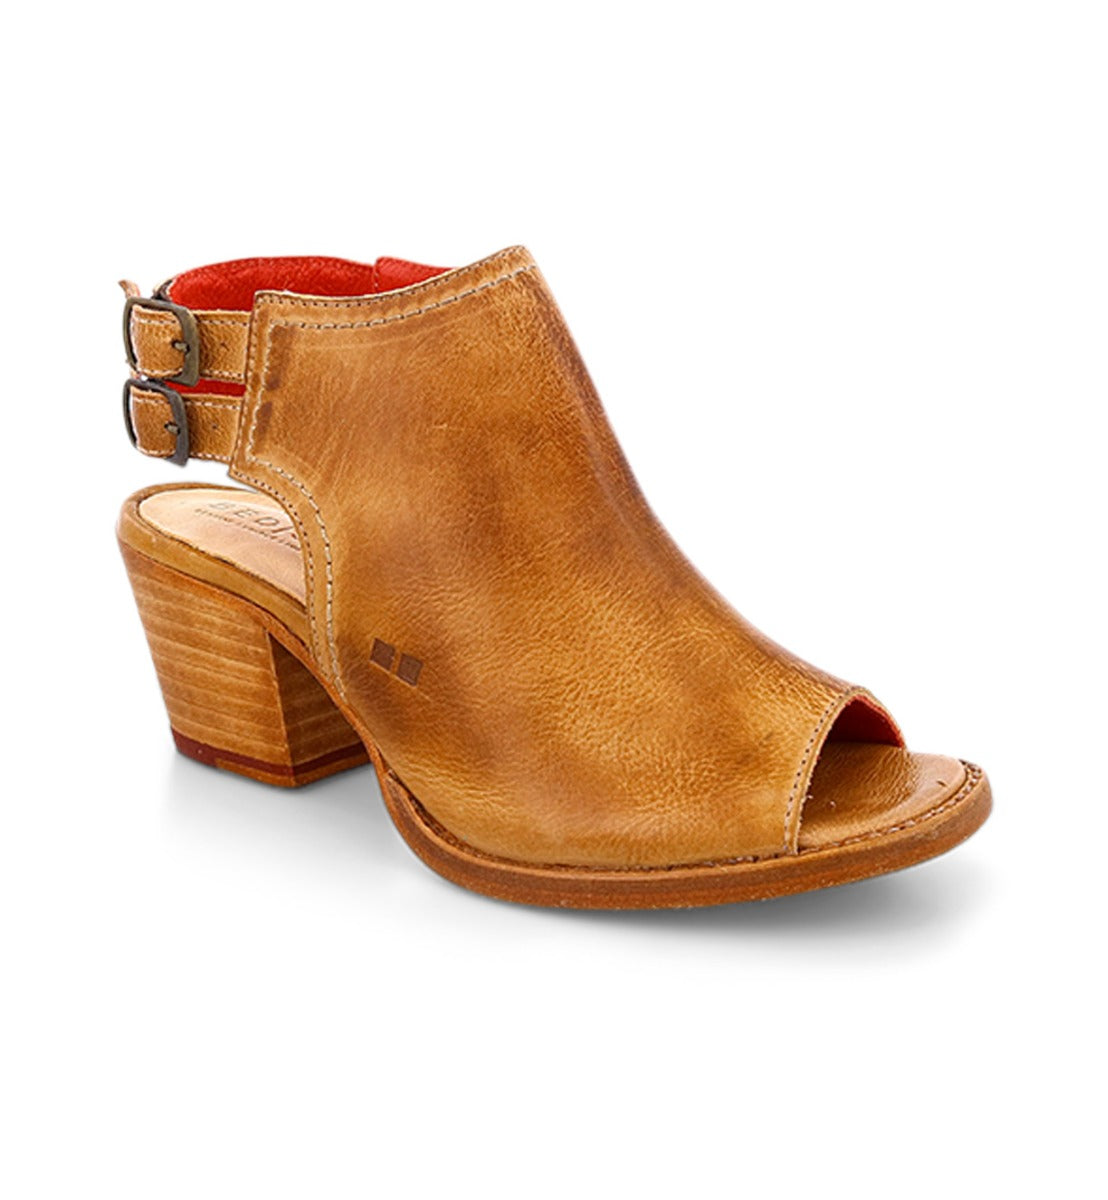 A women's Ireni tan leather sandal with a wooden heel by Bed Stu.